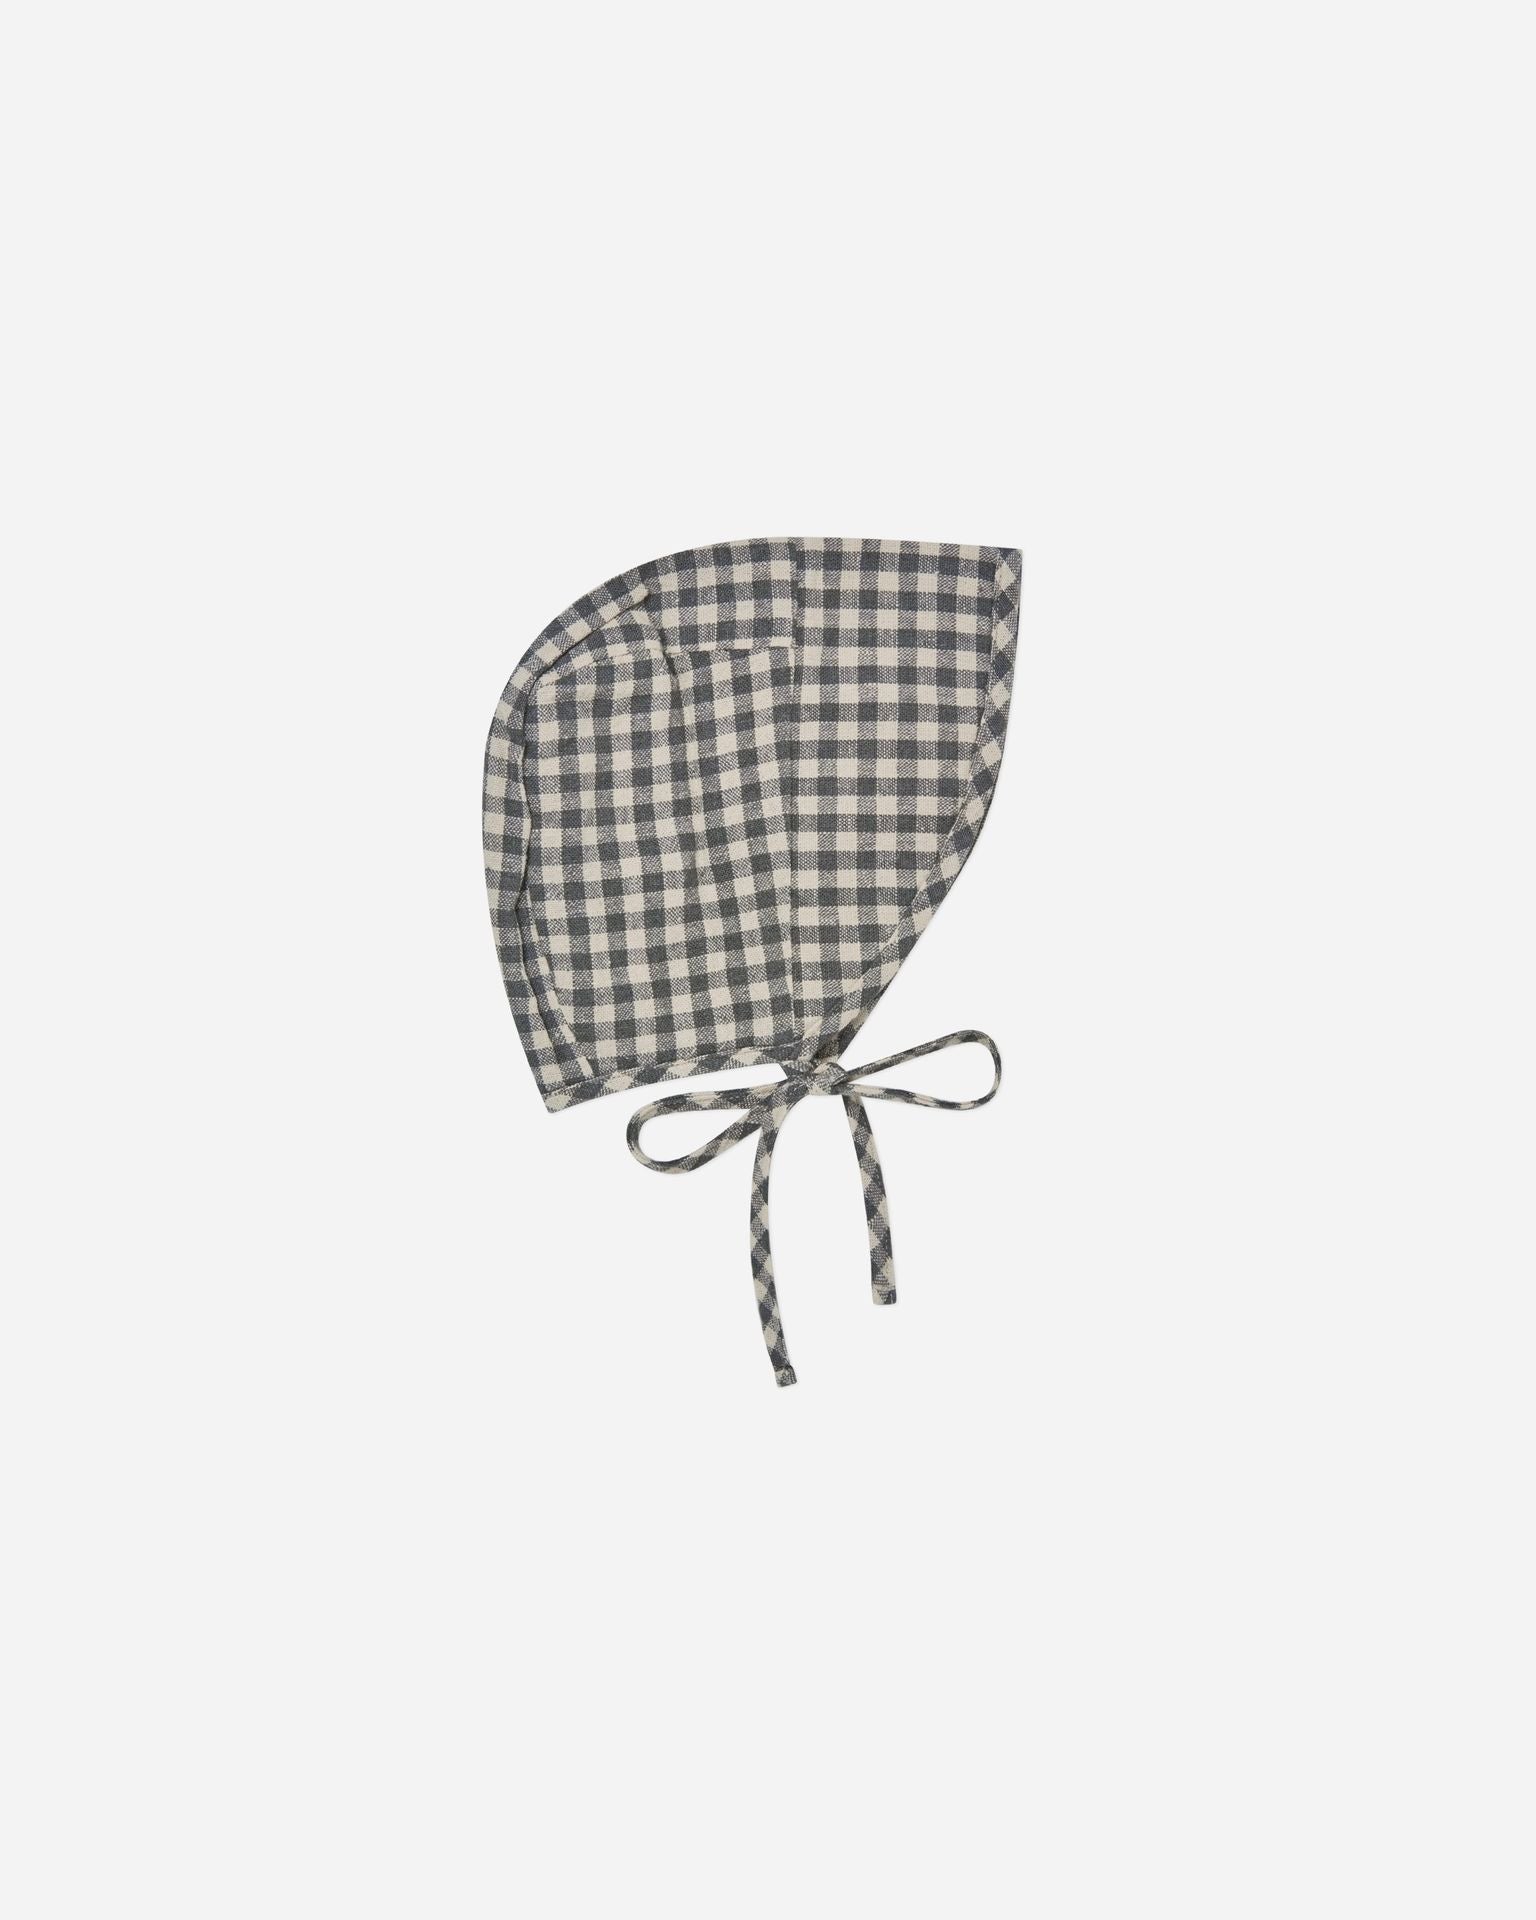 brimmed bonnet || marine gingham - Rylee + Cru | Kids Clothes | Trendy Baby Clothes | Modern Infant Outfits |